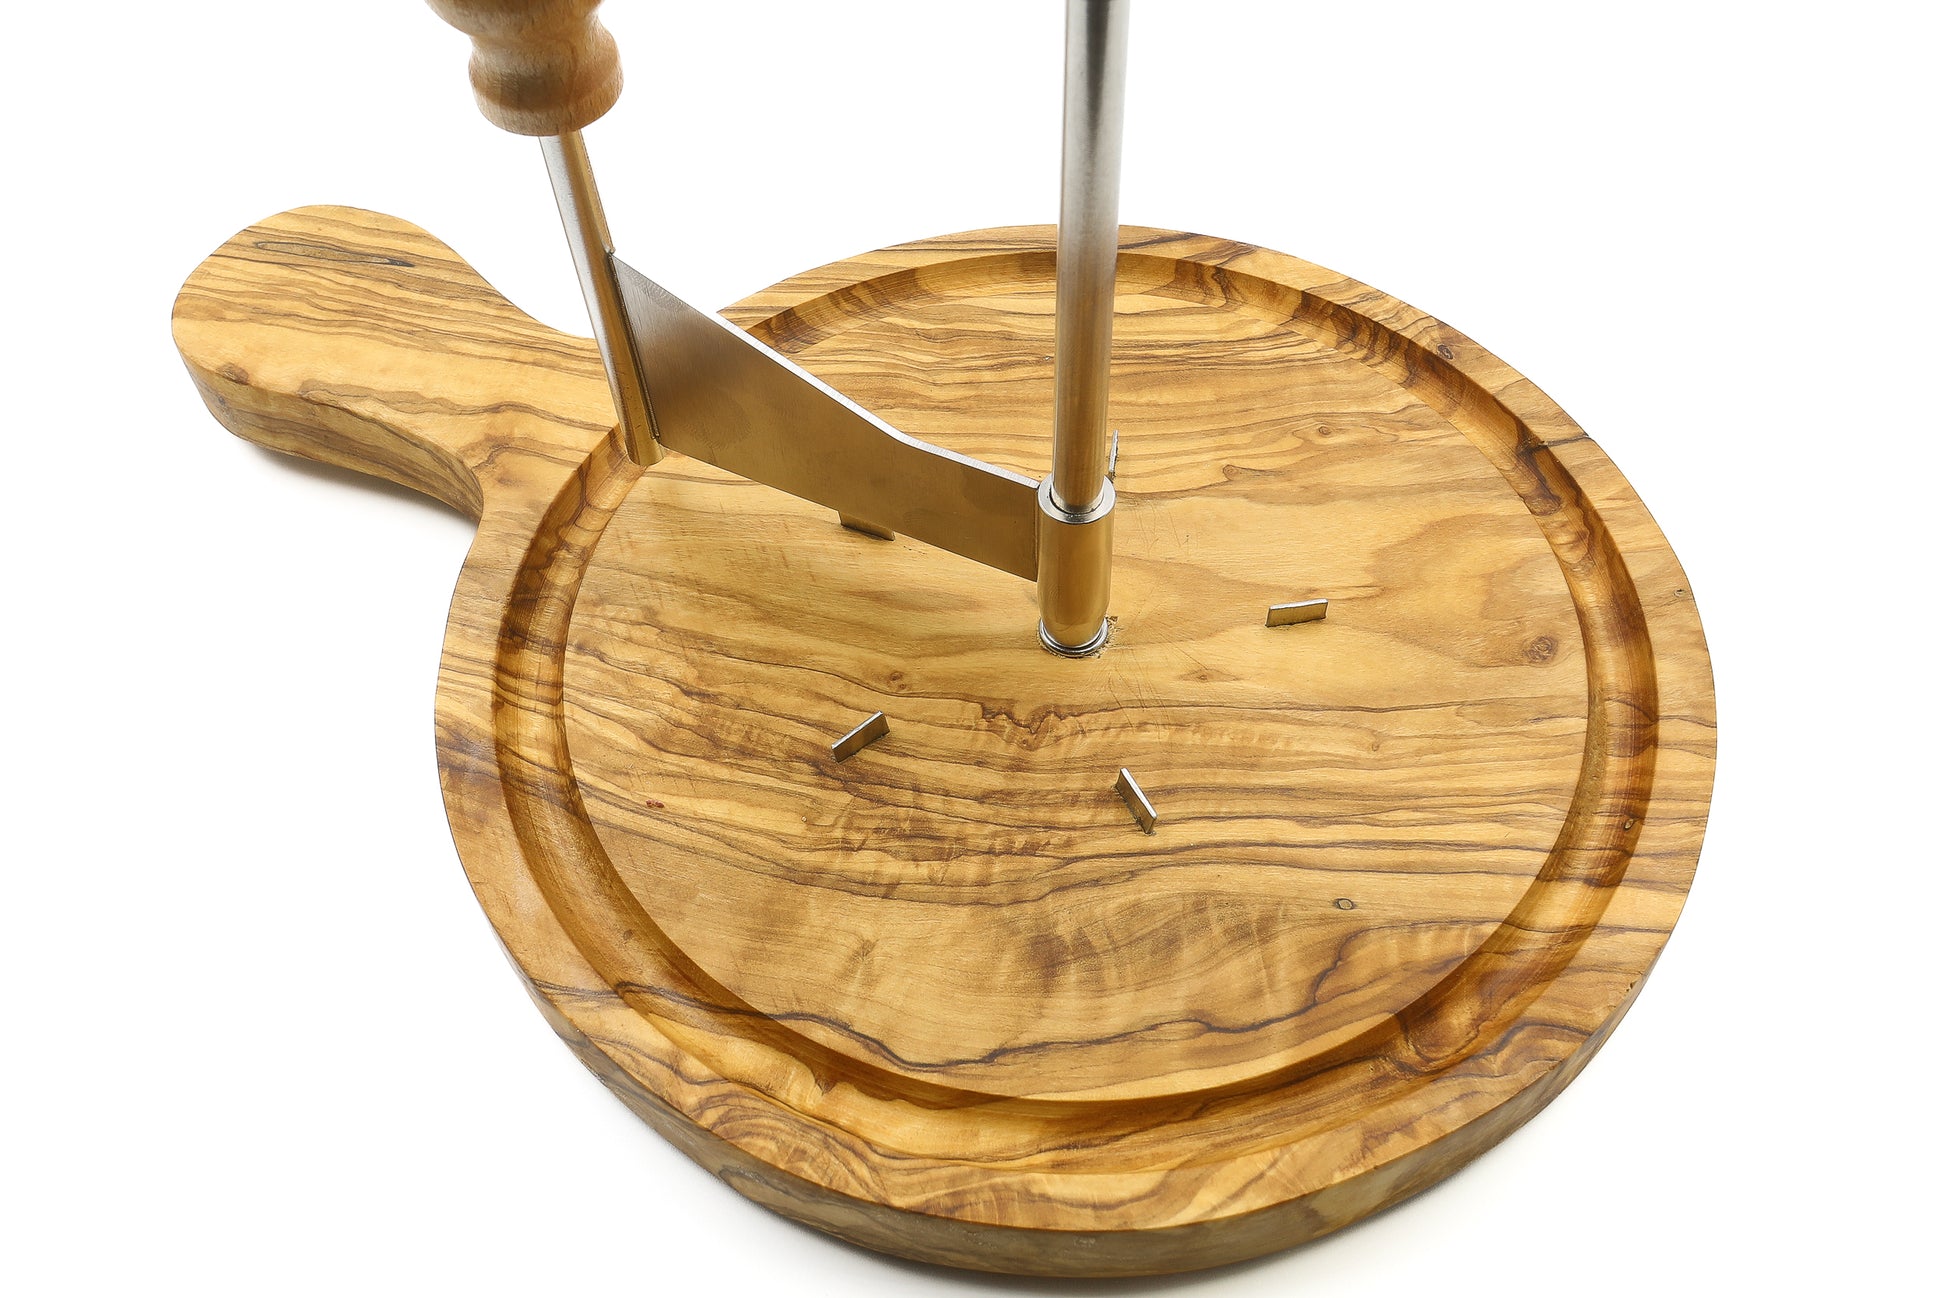 Unique olive wood kitchen accessory for serving cheese, equipped with a stainless steel platter and cheese shaver